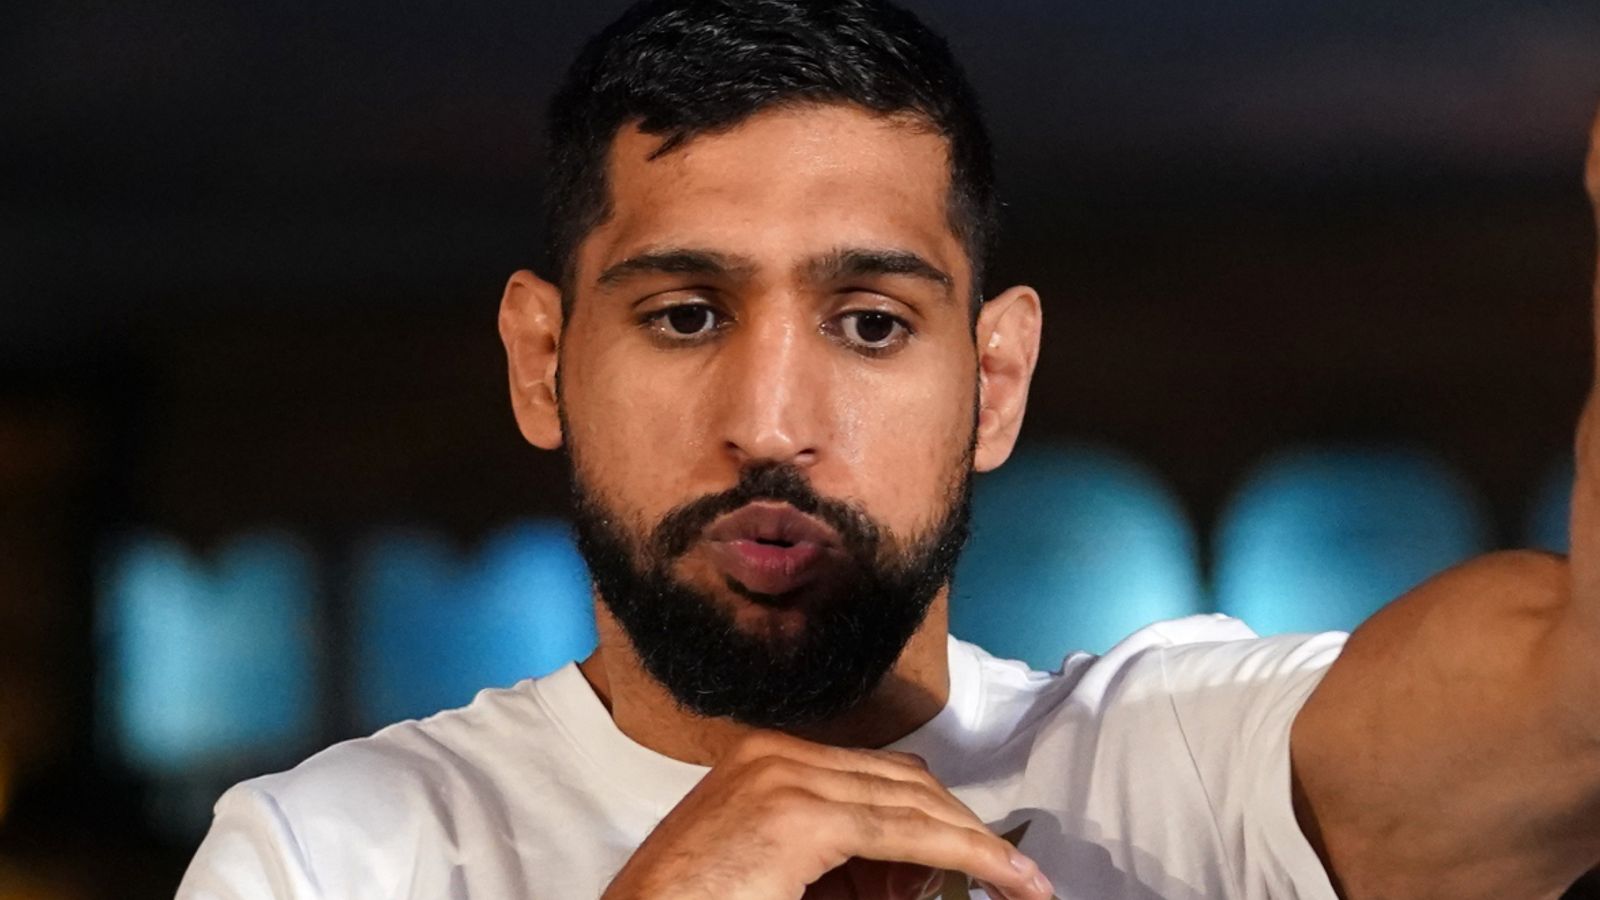 Did Amir Khan’s trainer give away his tactics to Kell Brook during a heated press conference exchange?